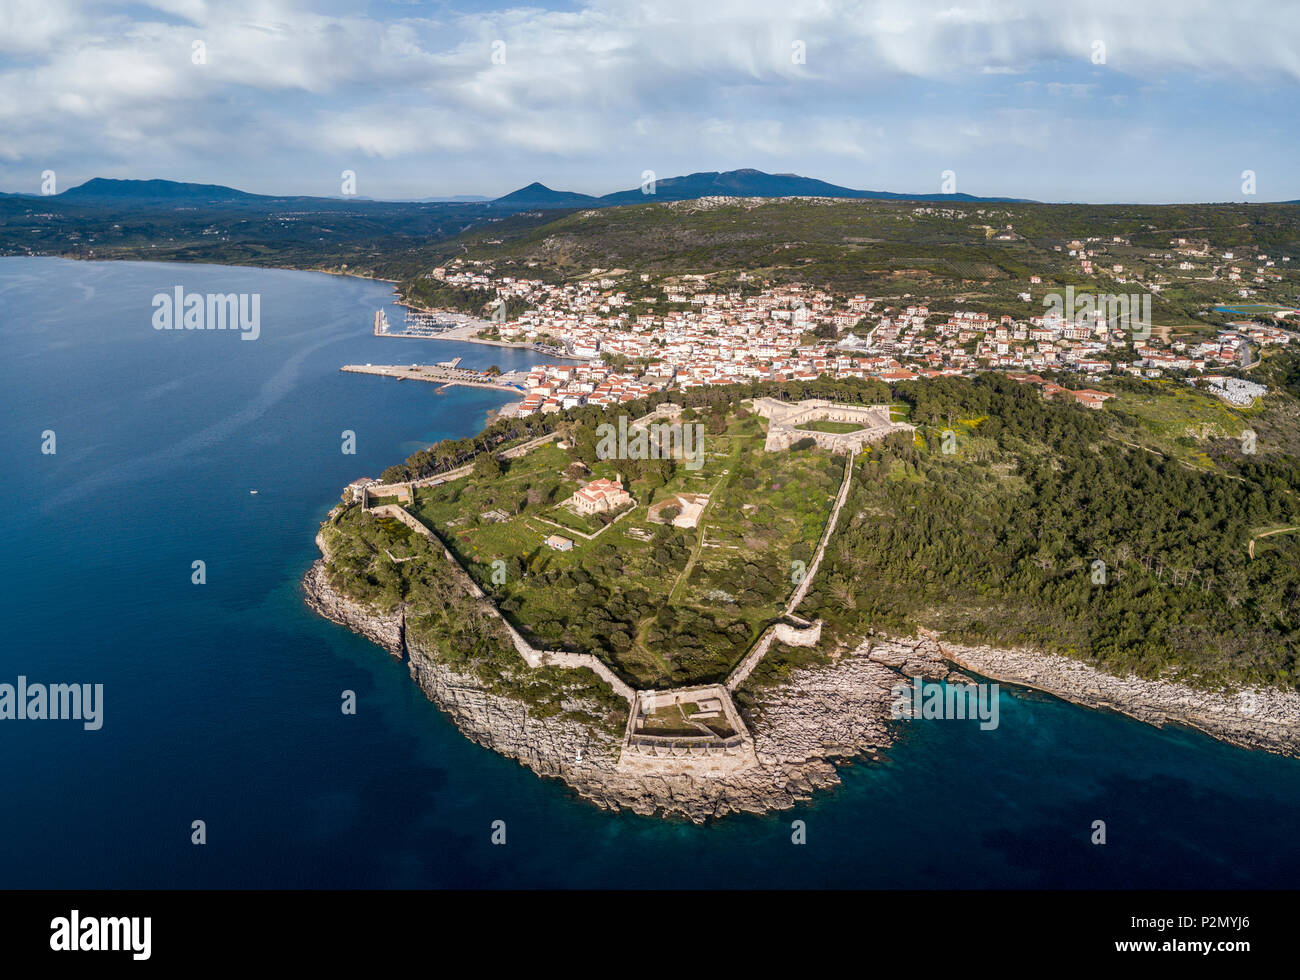 Aerial view of Pylos town and castle in the Peloponnese peninsula of southern Greece Stock Photo